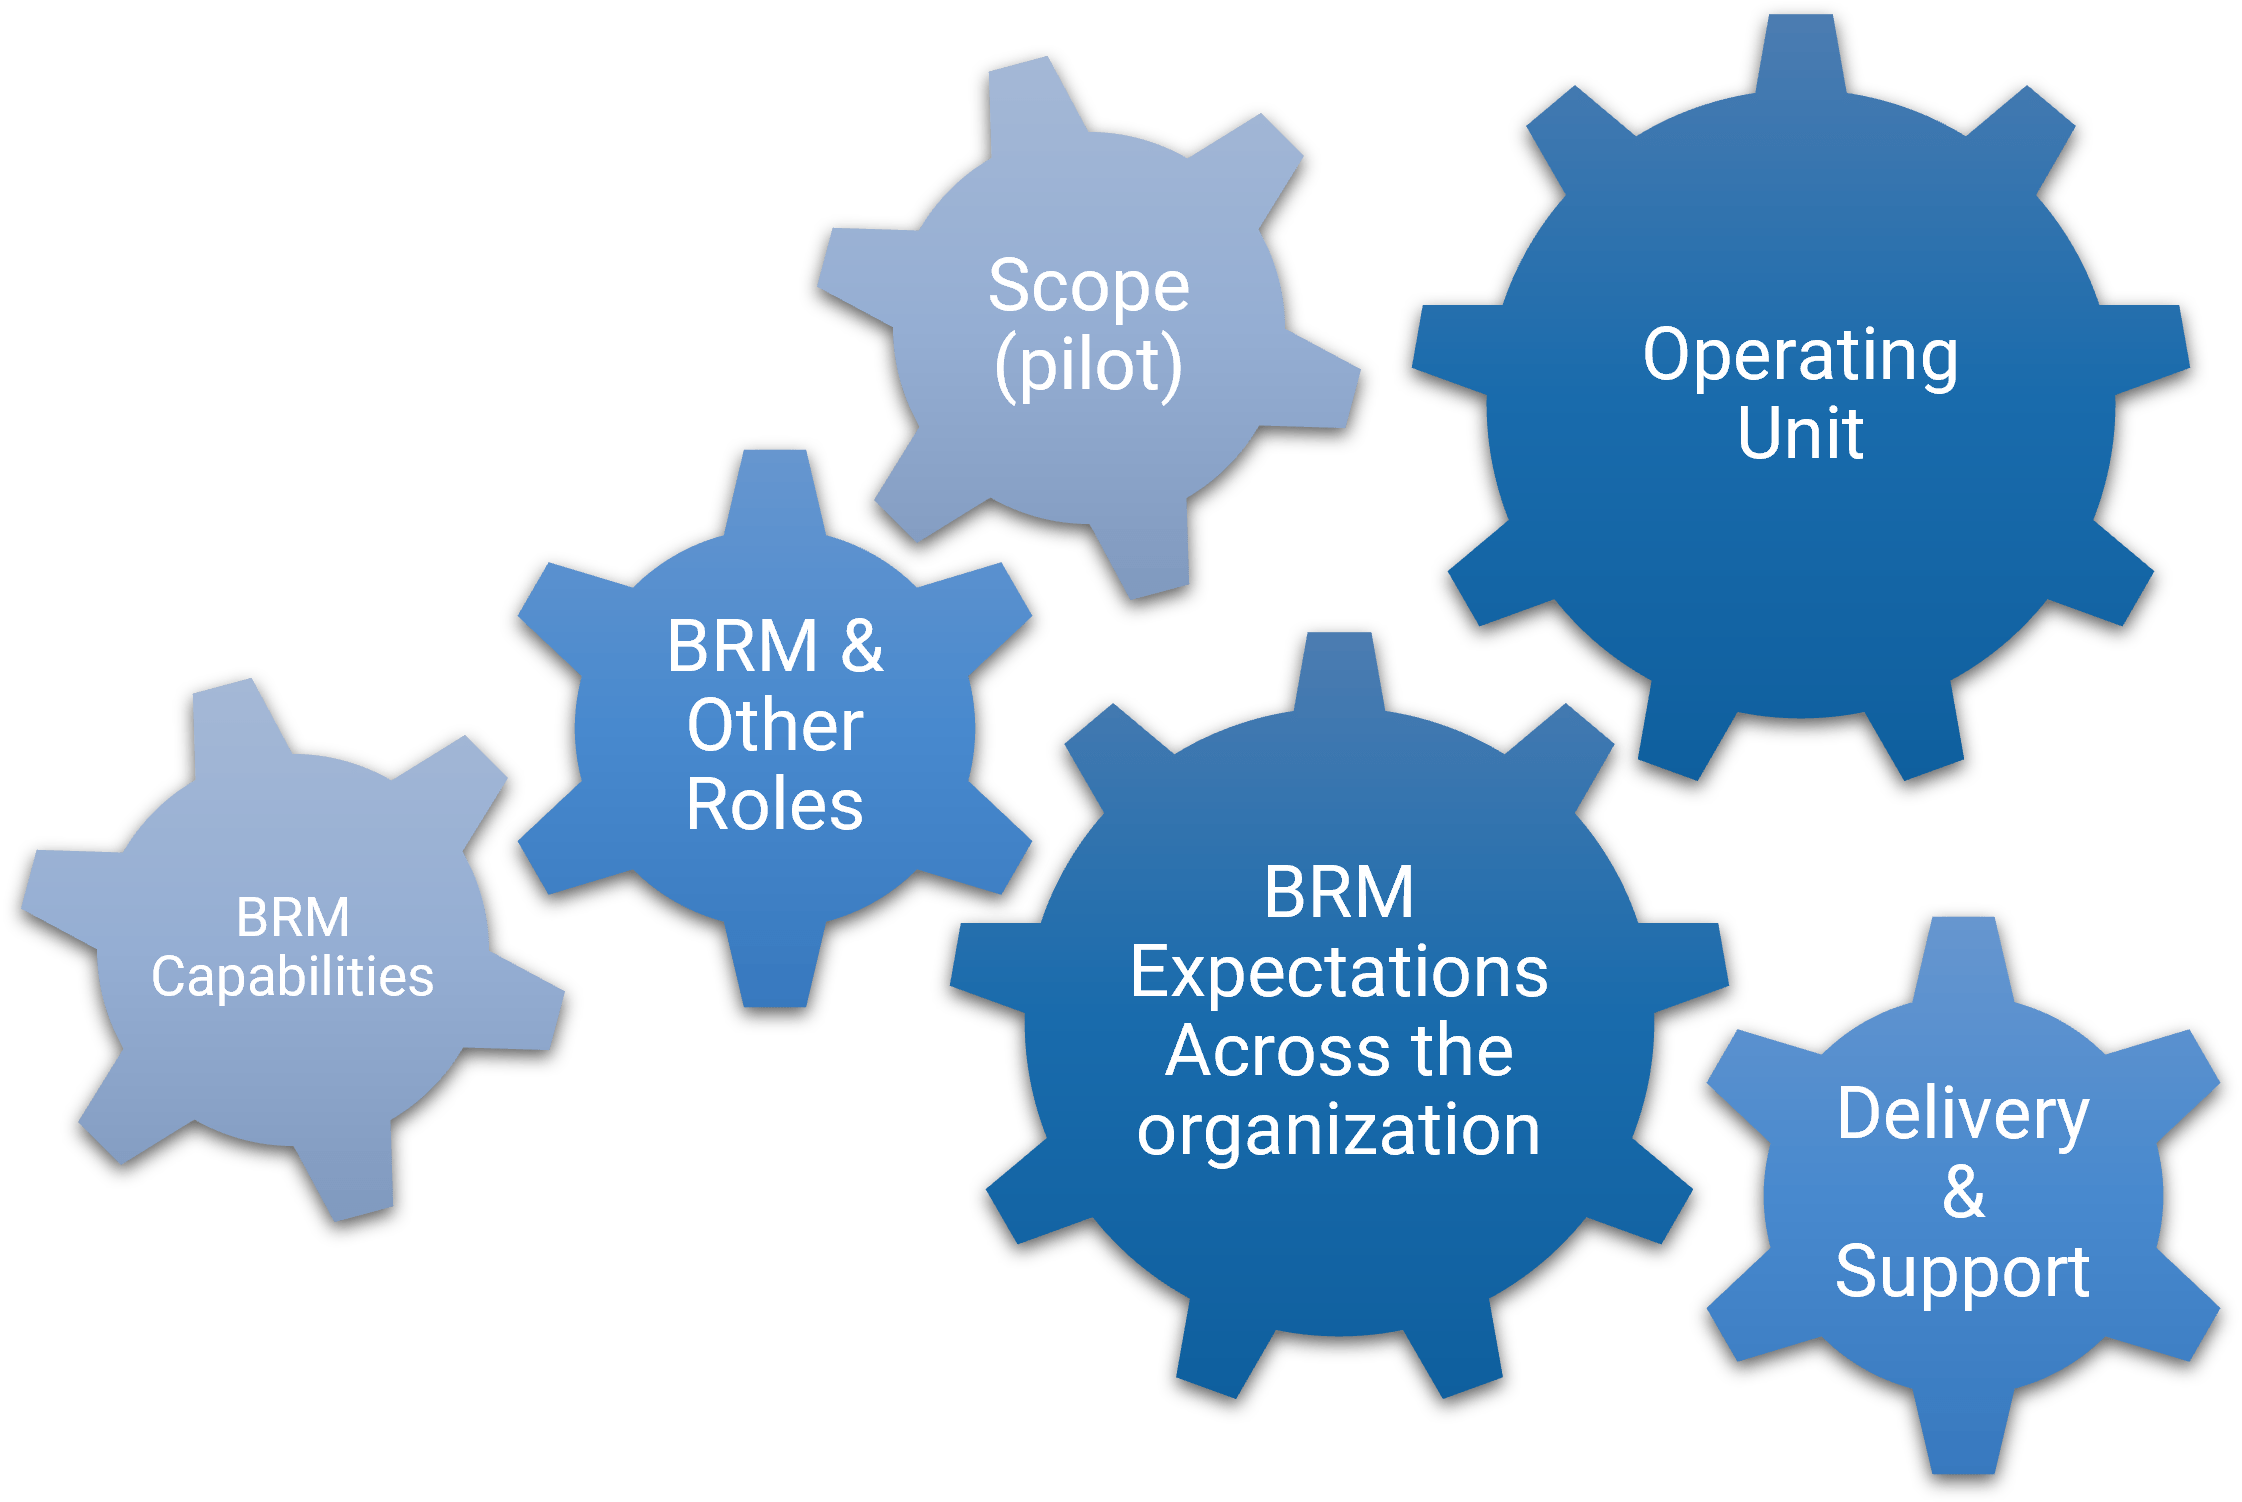 Gears with different BRM model terms: 'BRM Capabilities', 'BRM & Other Roles', 'Scope (pilot)', 'Operating Unit', 'BRM Expectations Across the organization', and 'Delivery & Support'.